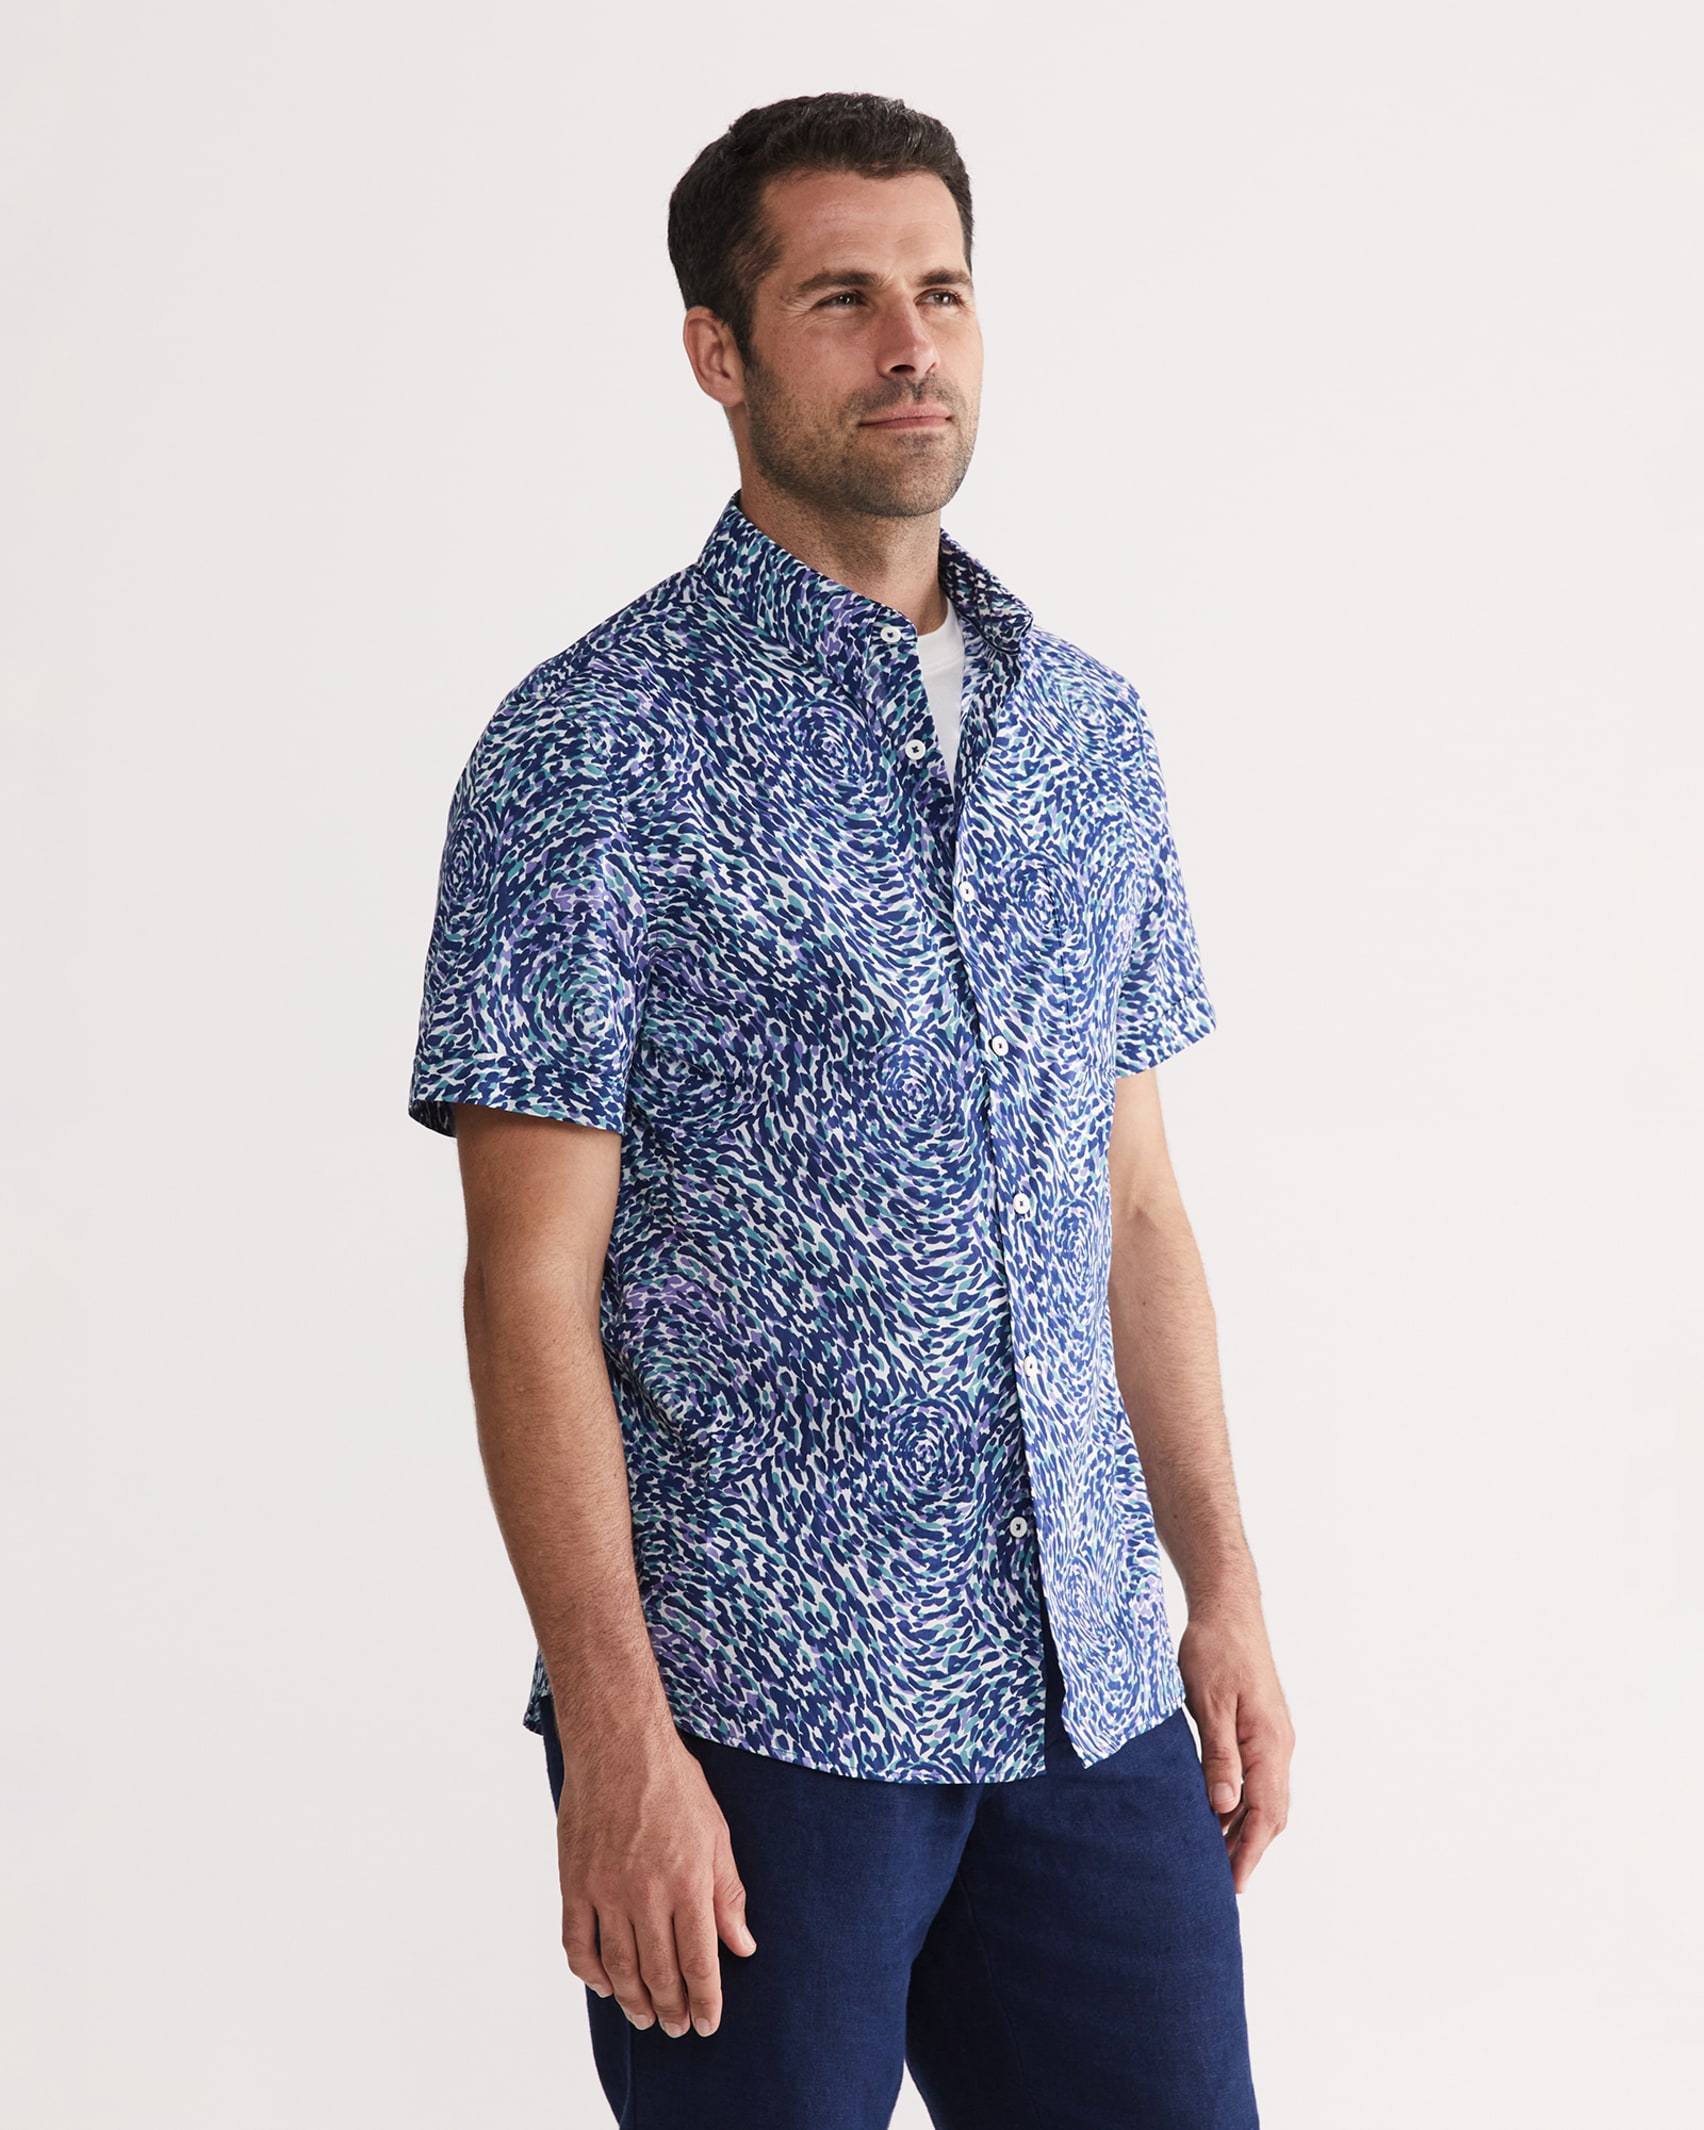 Tolla Liberty Tapered Shirt in TEAL